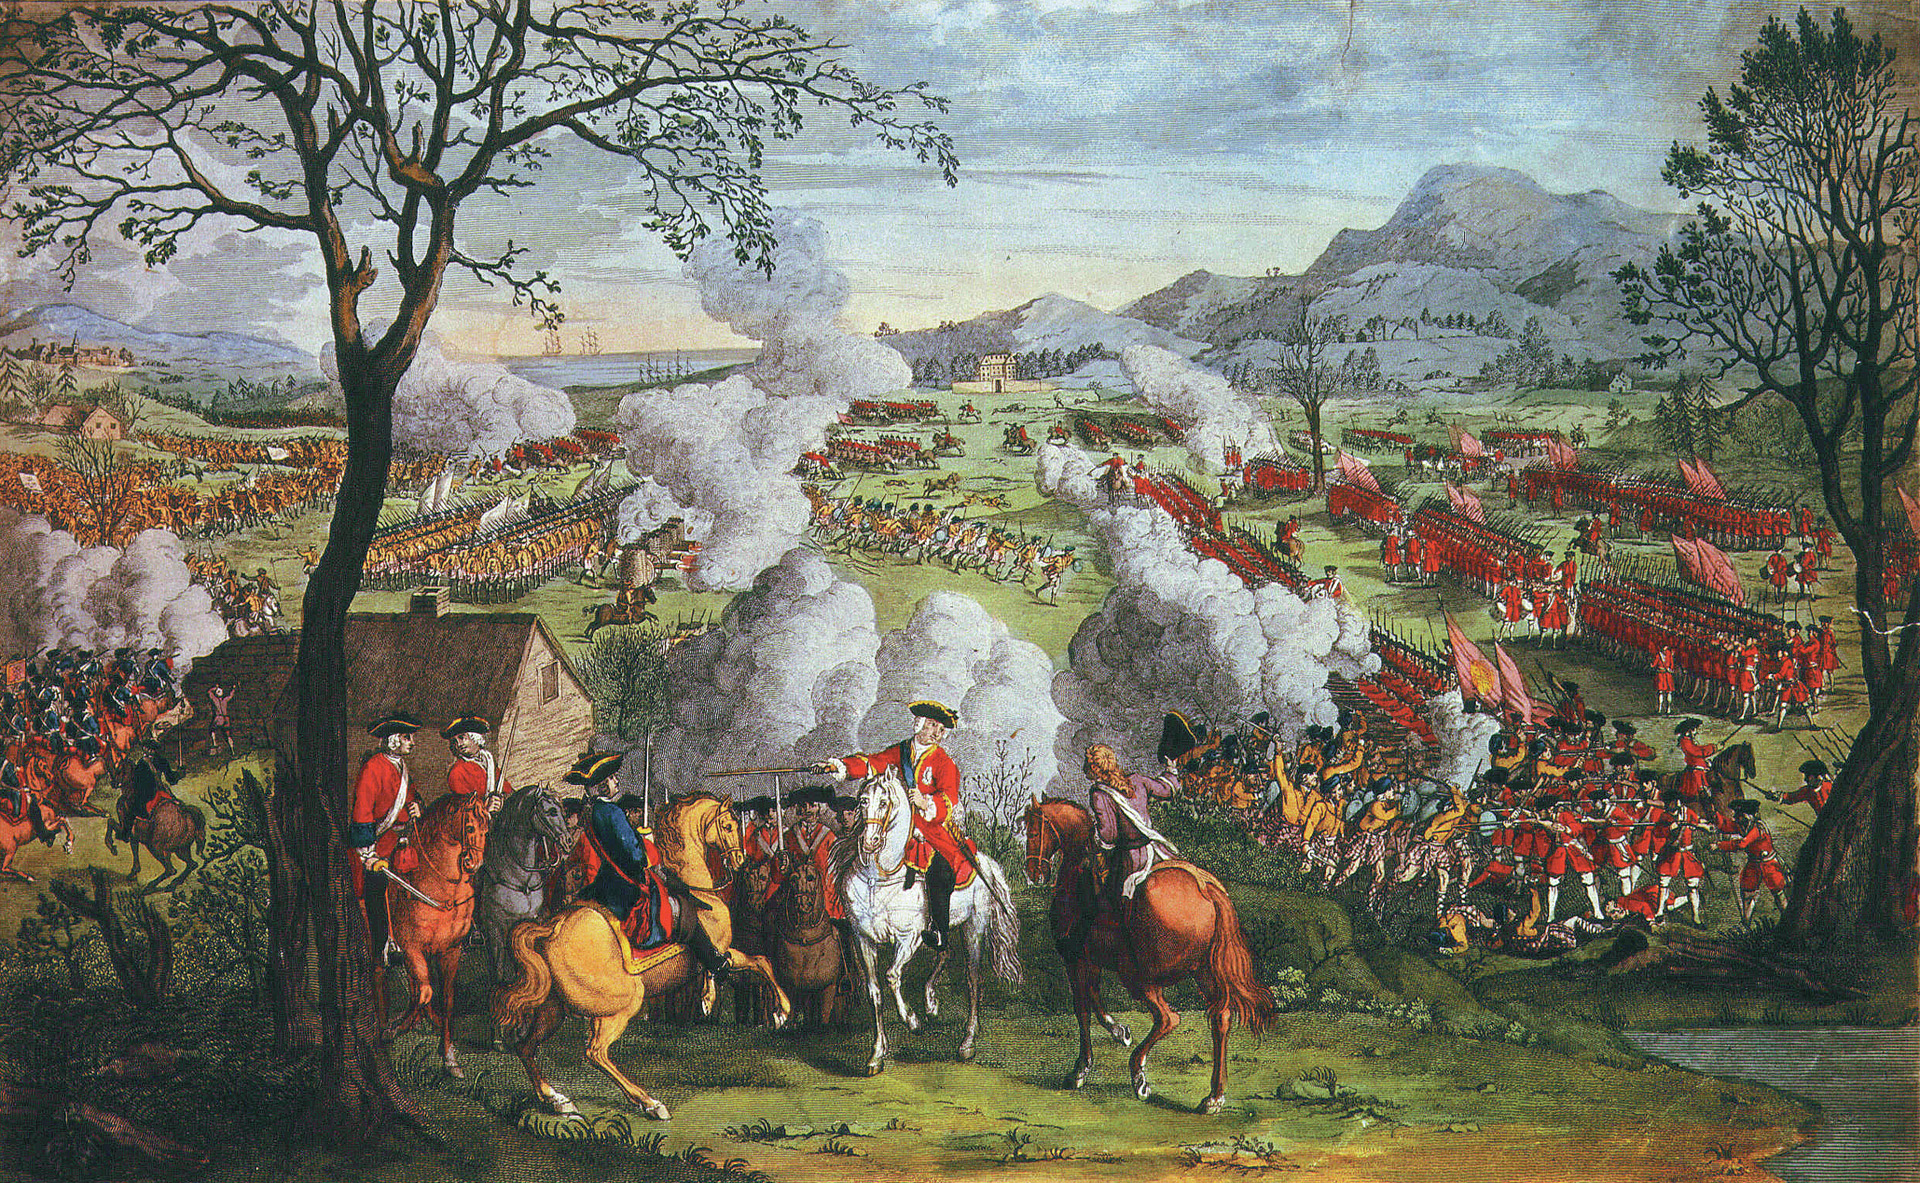 The Duke of Cumberland keeps a firm command of the battle. Two previous British commanders had been humiliated by Charles’s forces.